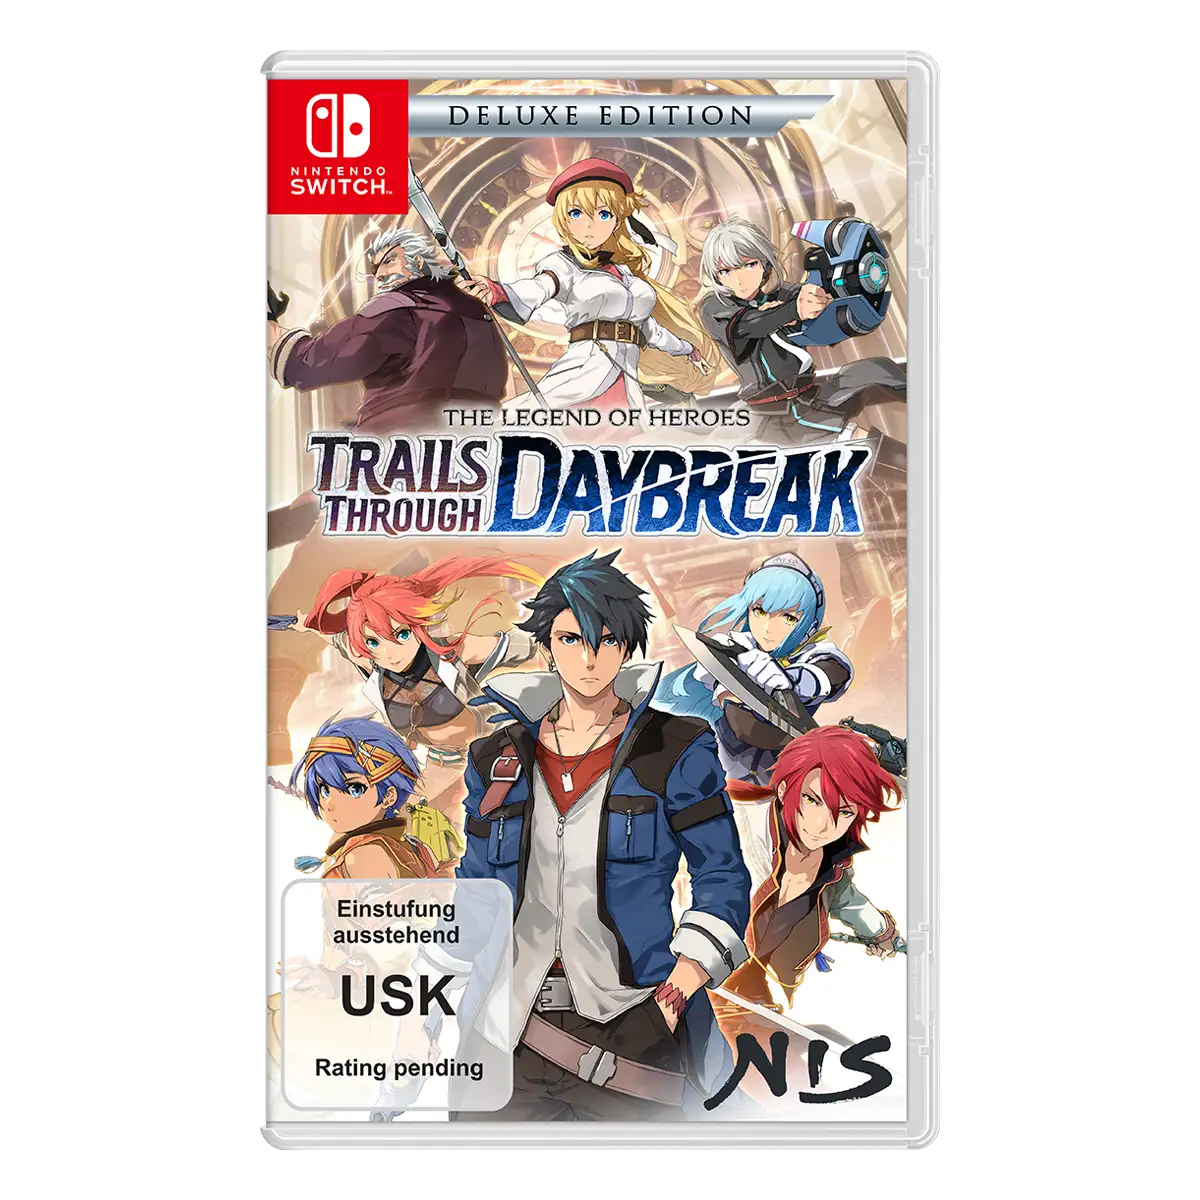 The Legend of Heroes: Trails through Daybreak - Deluxe Edition (Switch) Cover